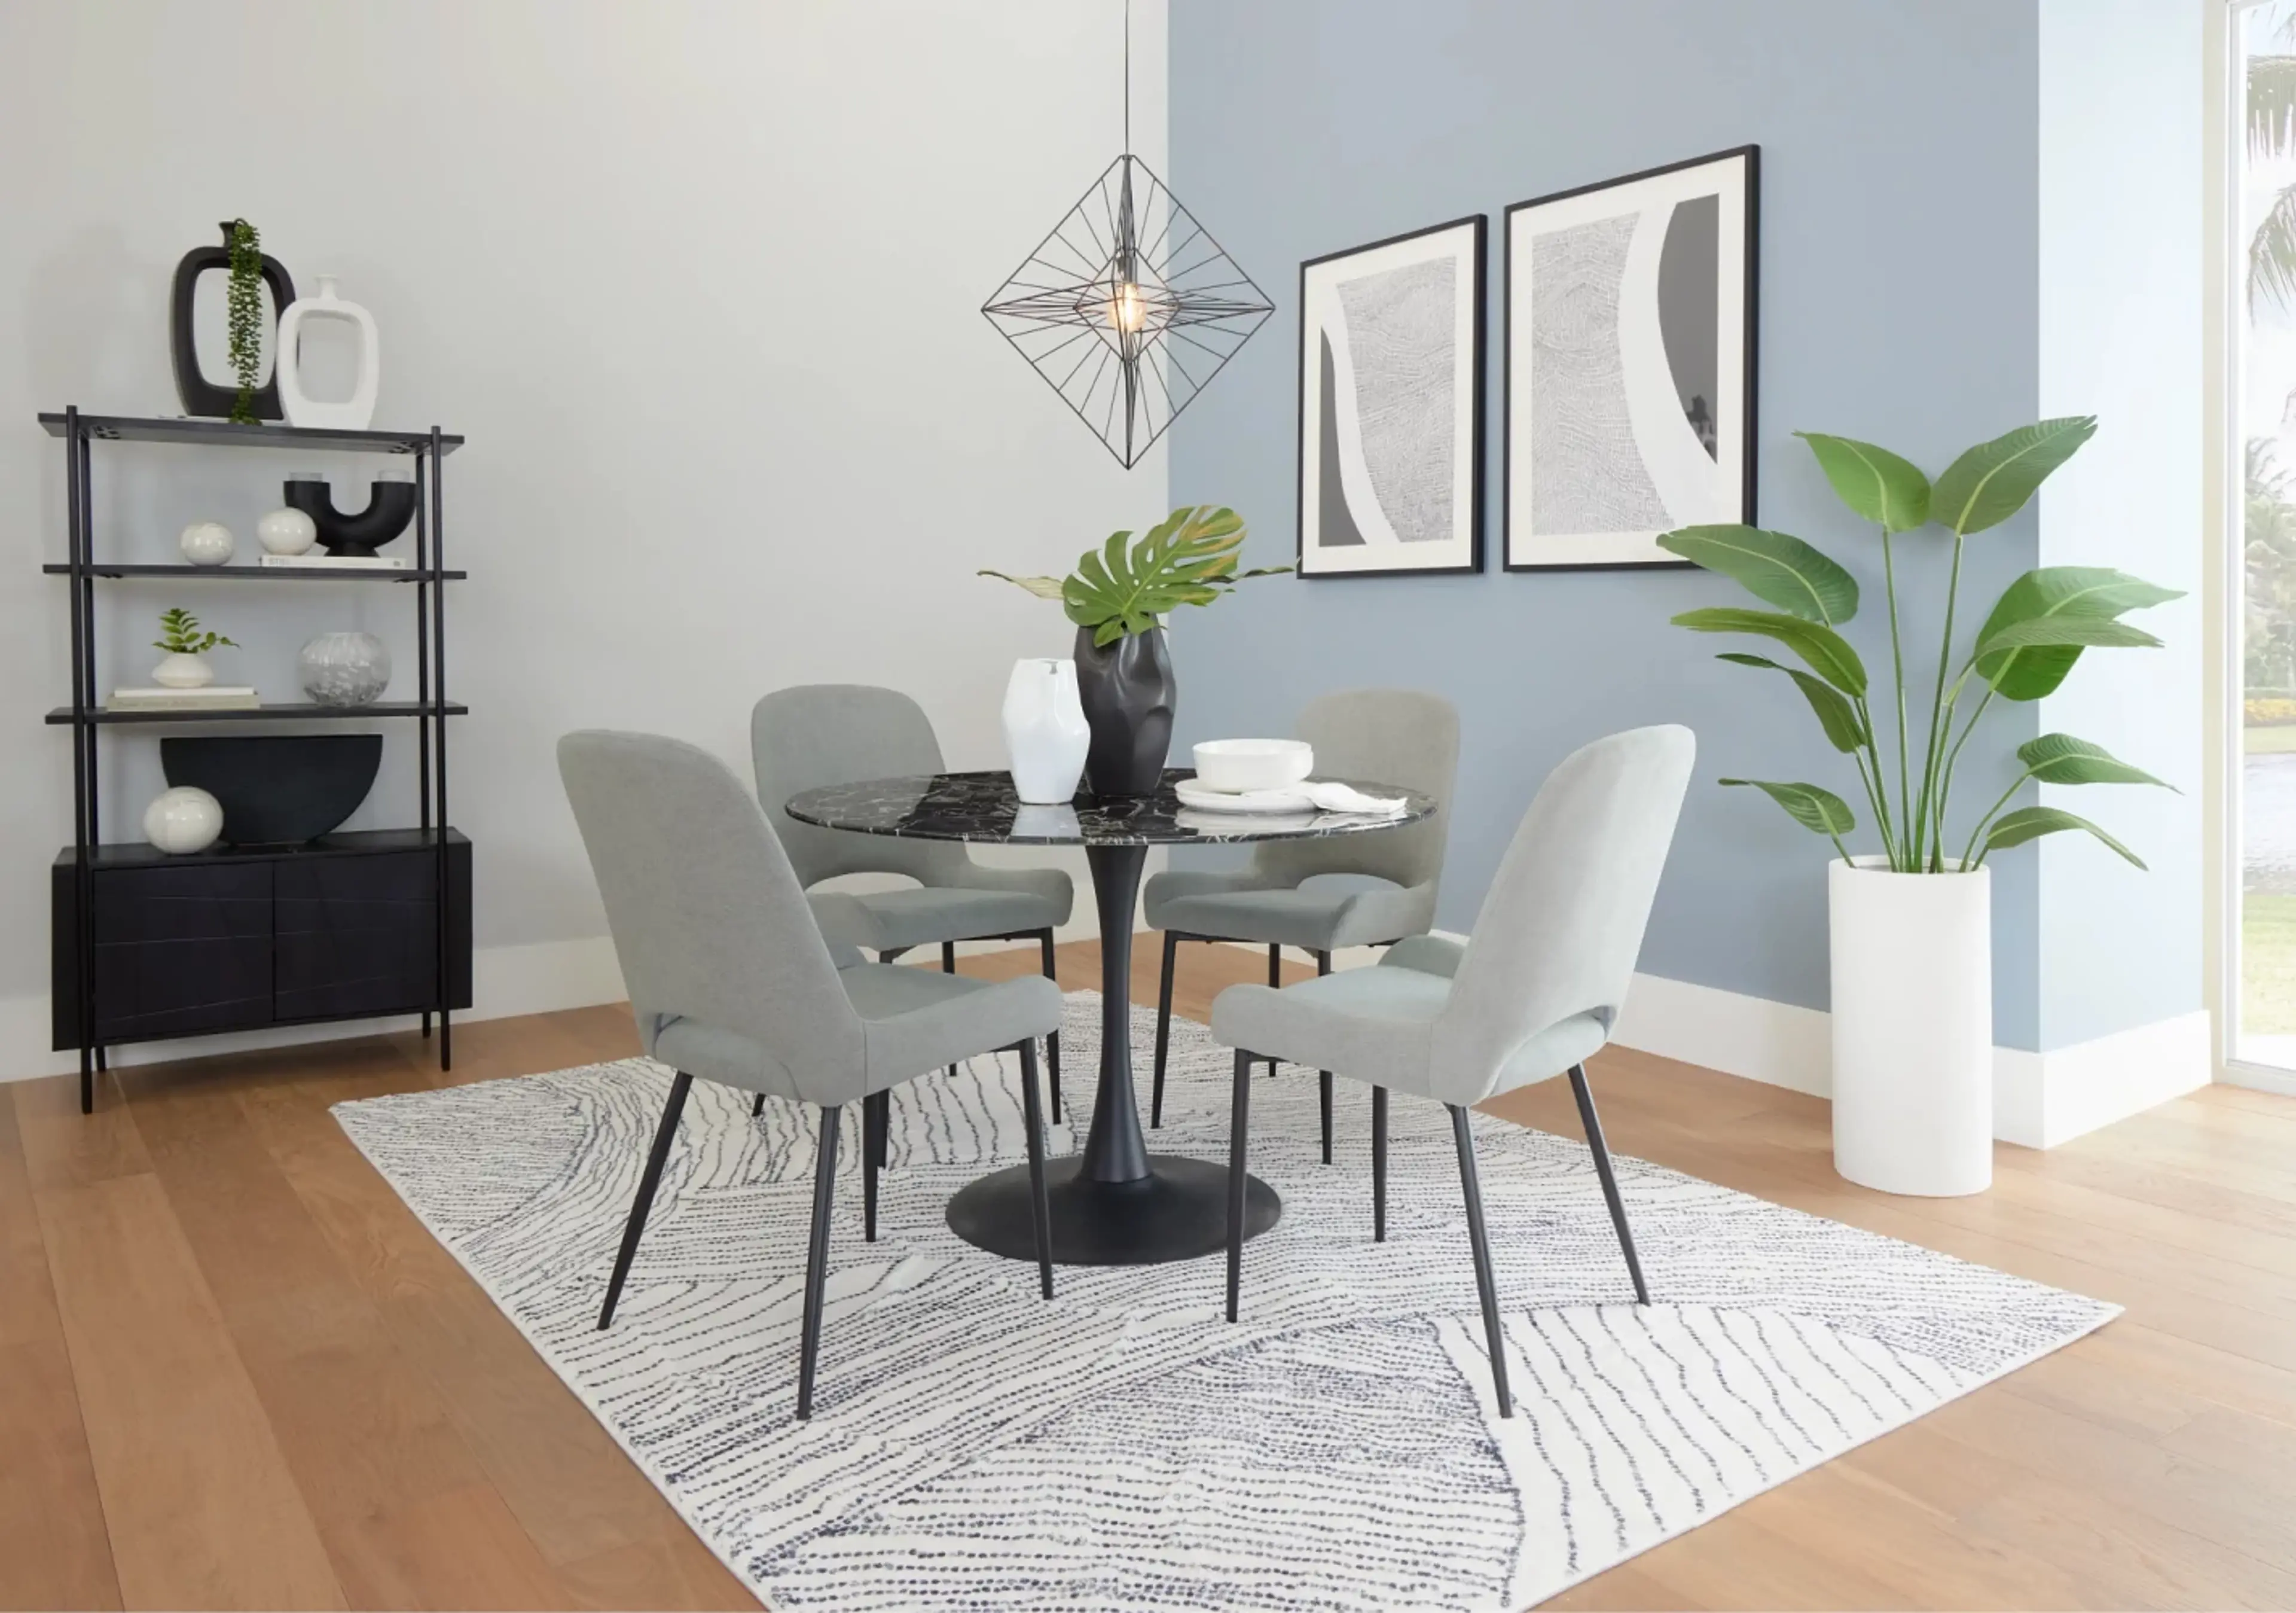 Small-Space Brela Dining Table